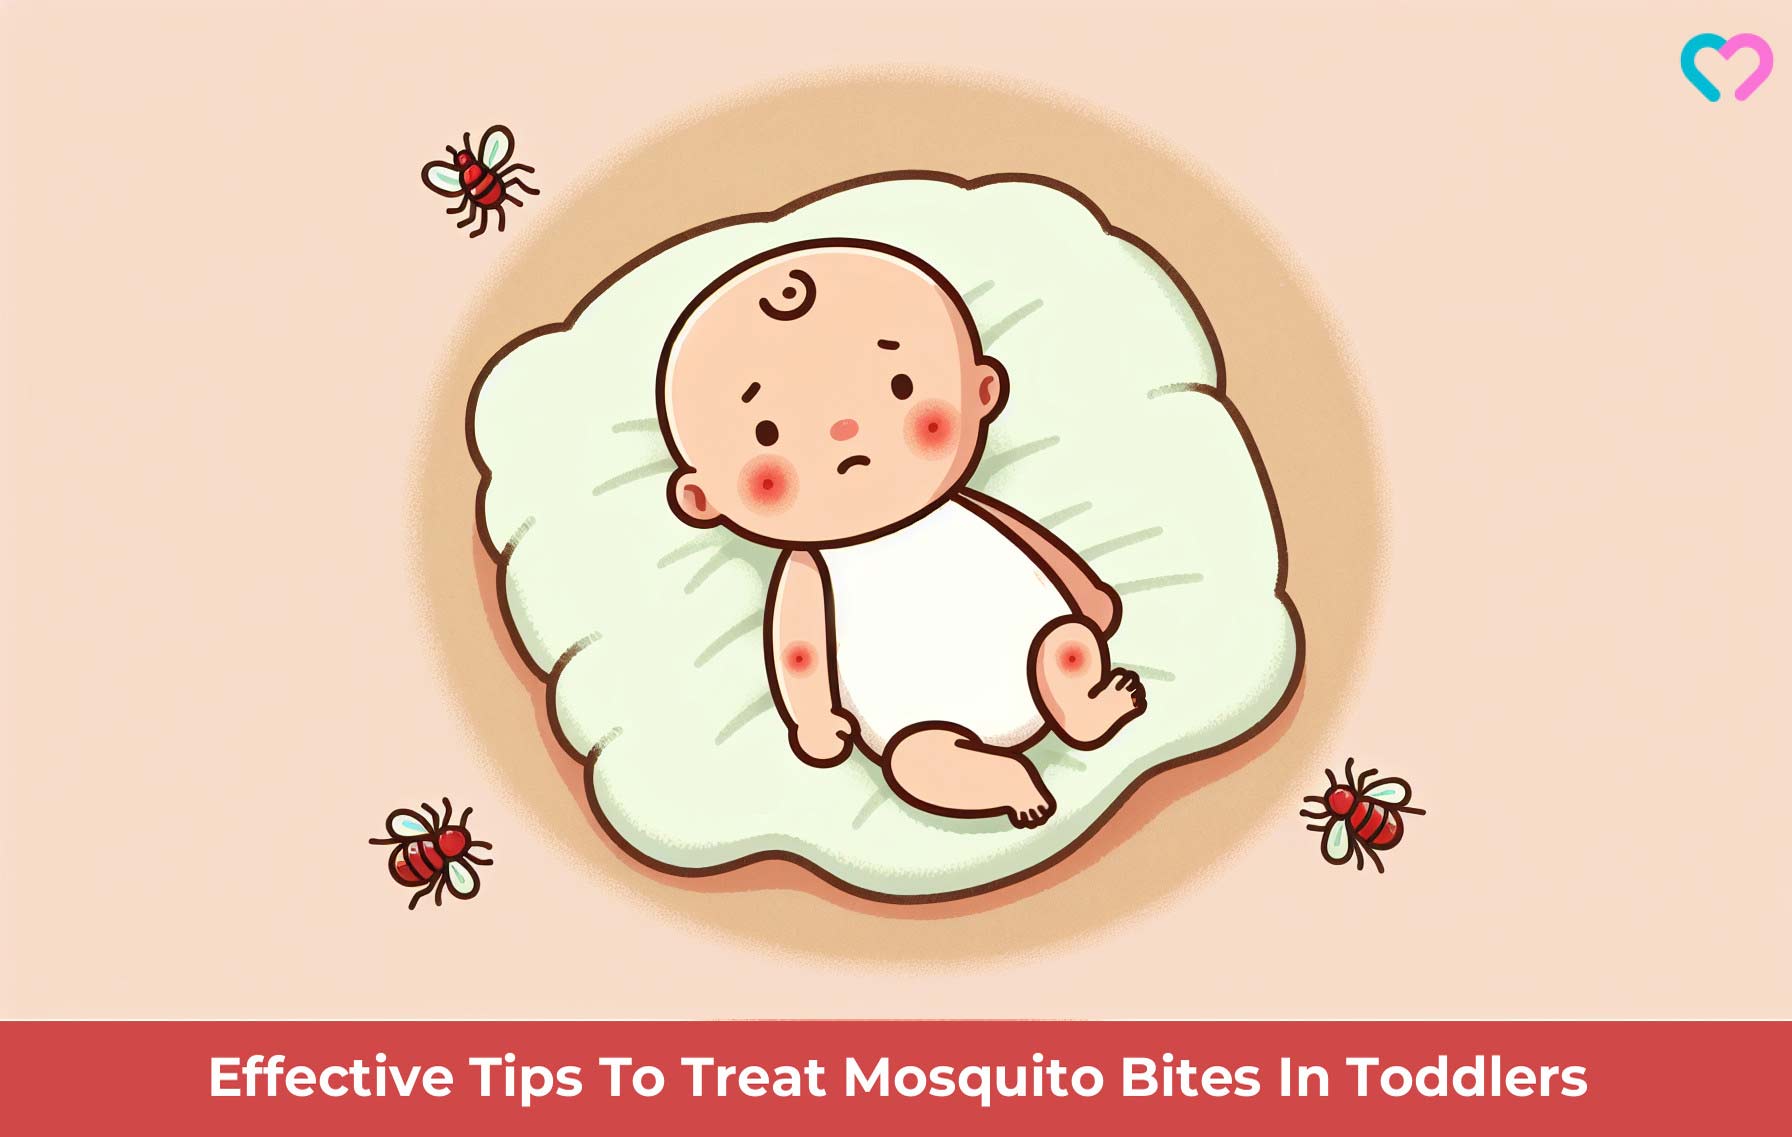 Mosquito Bites In Toddlers_illustration